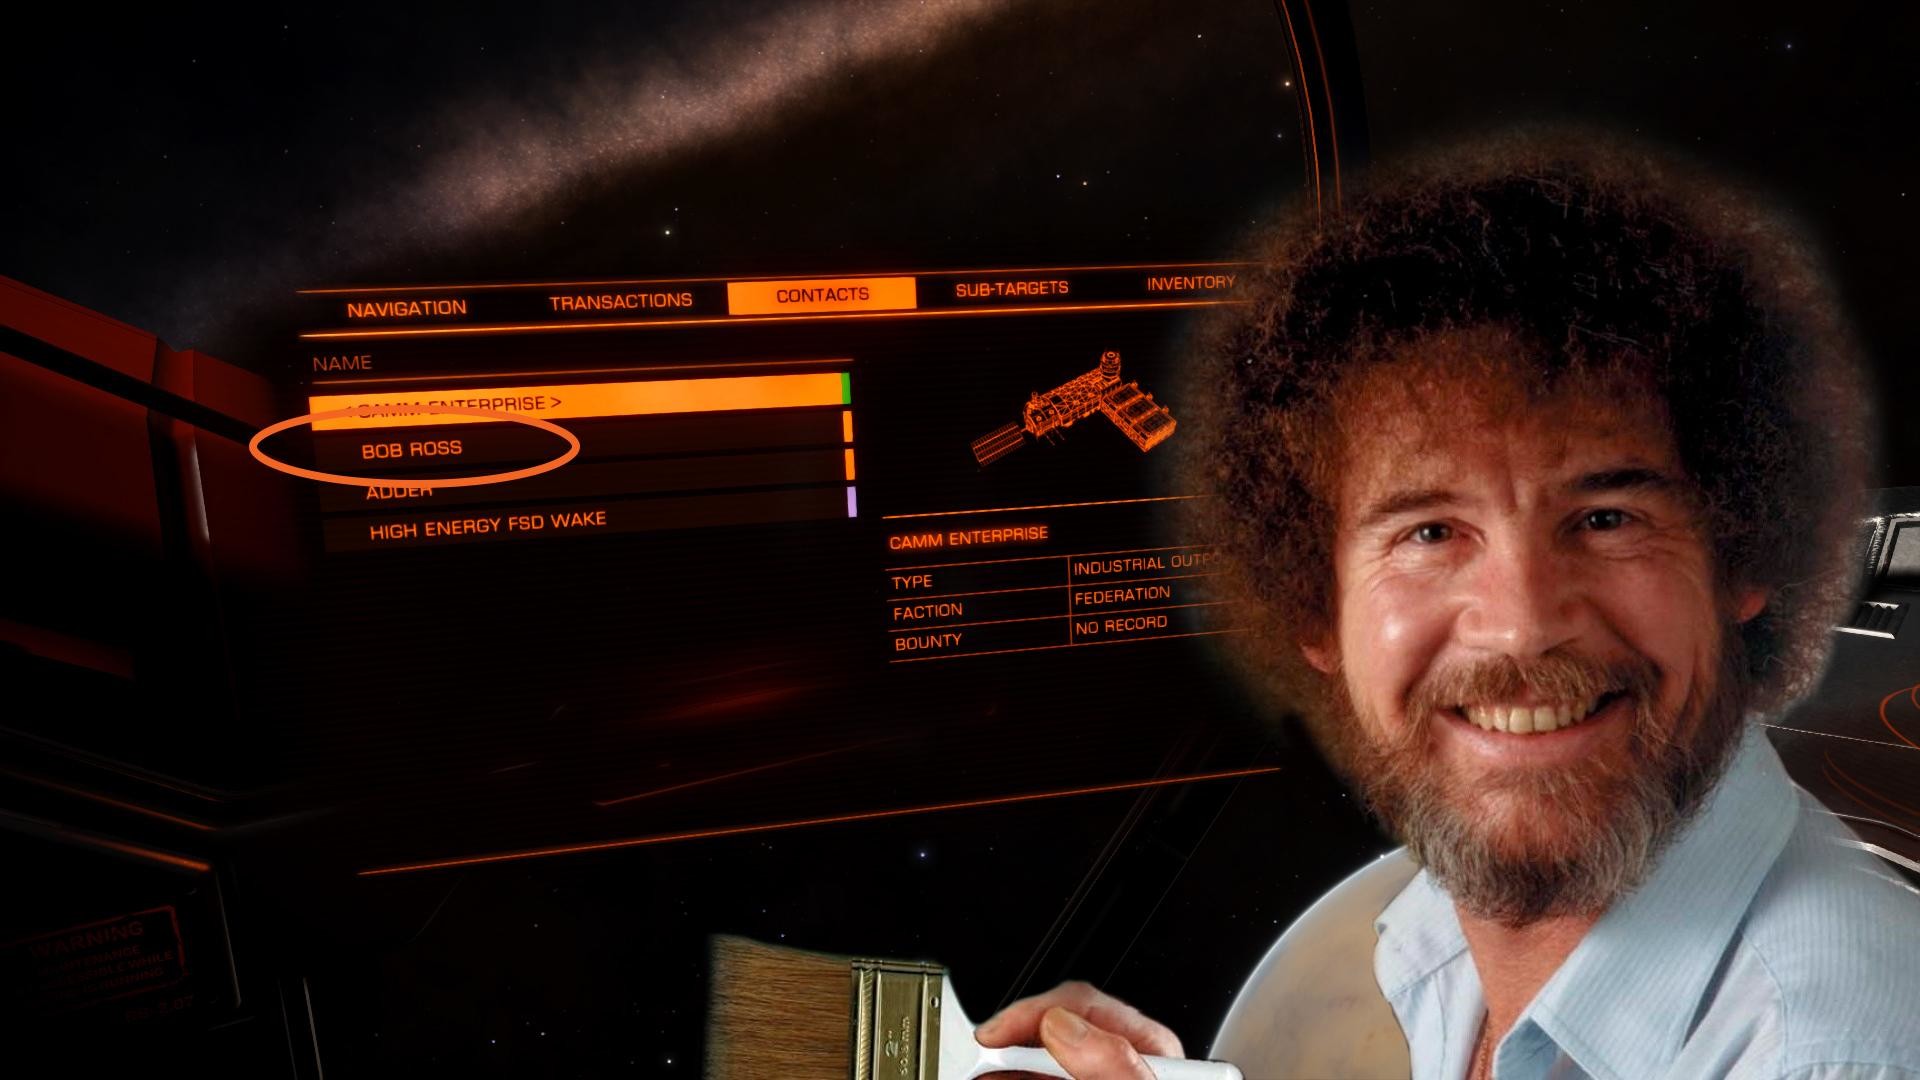 Since the Mods in / r / EliteDangerous clearly hate Bob Ross